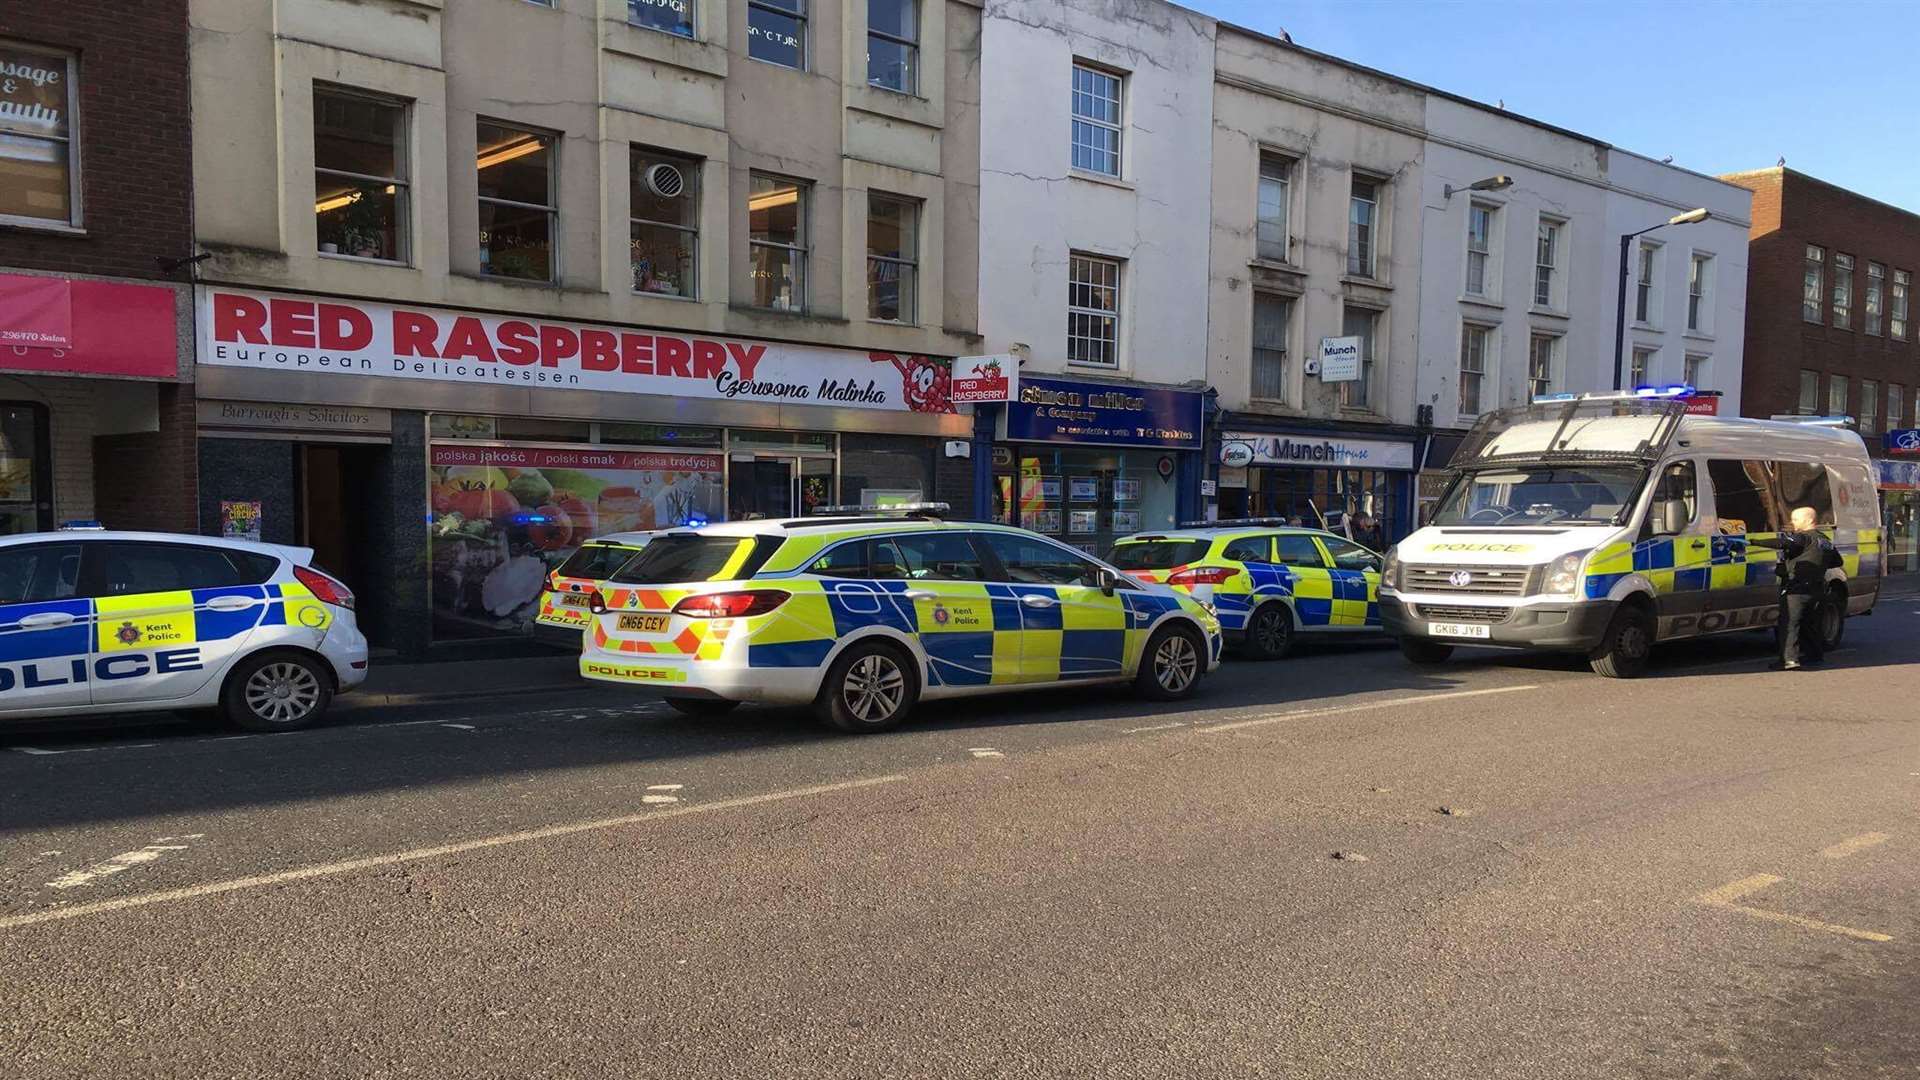 There was a large police presence in King Street. Picture: Jessica Finn